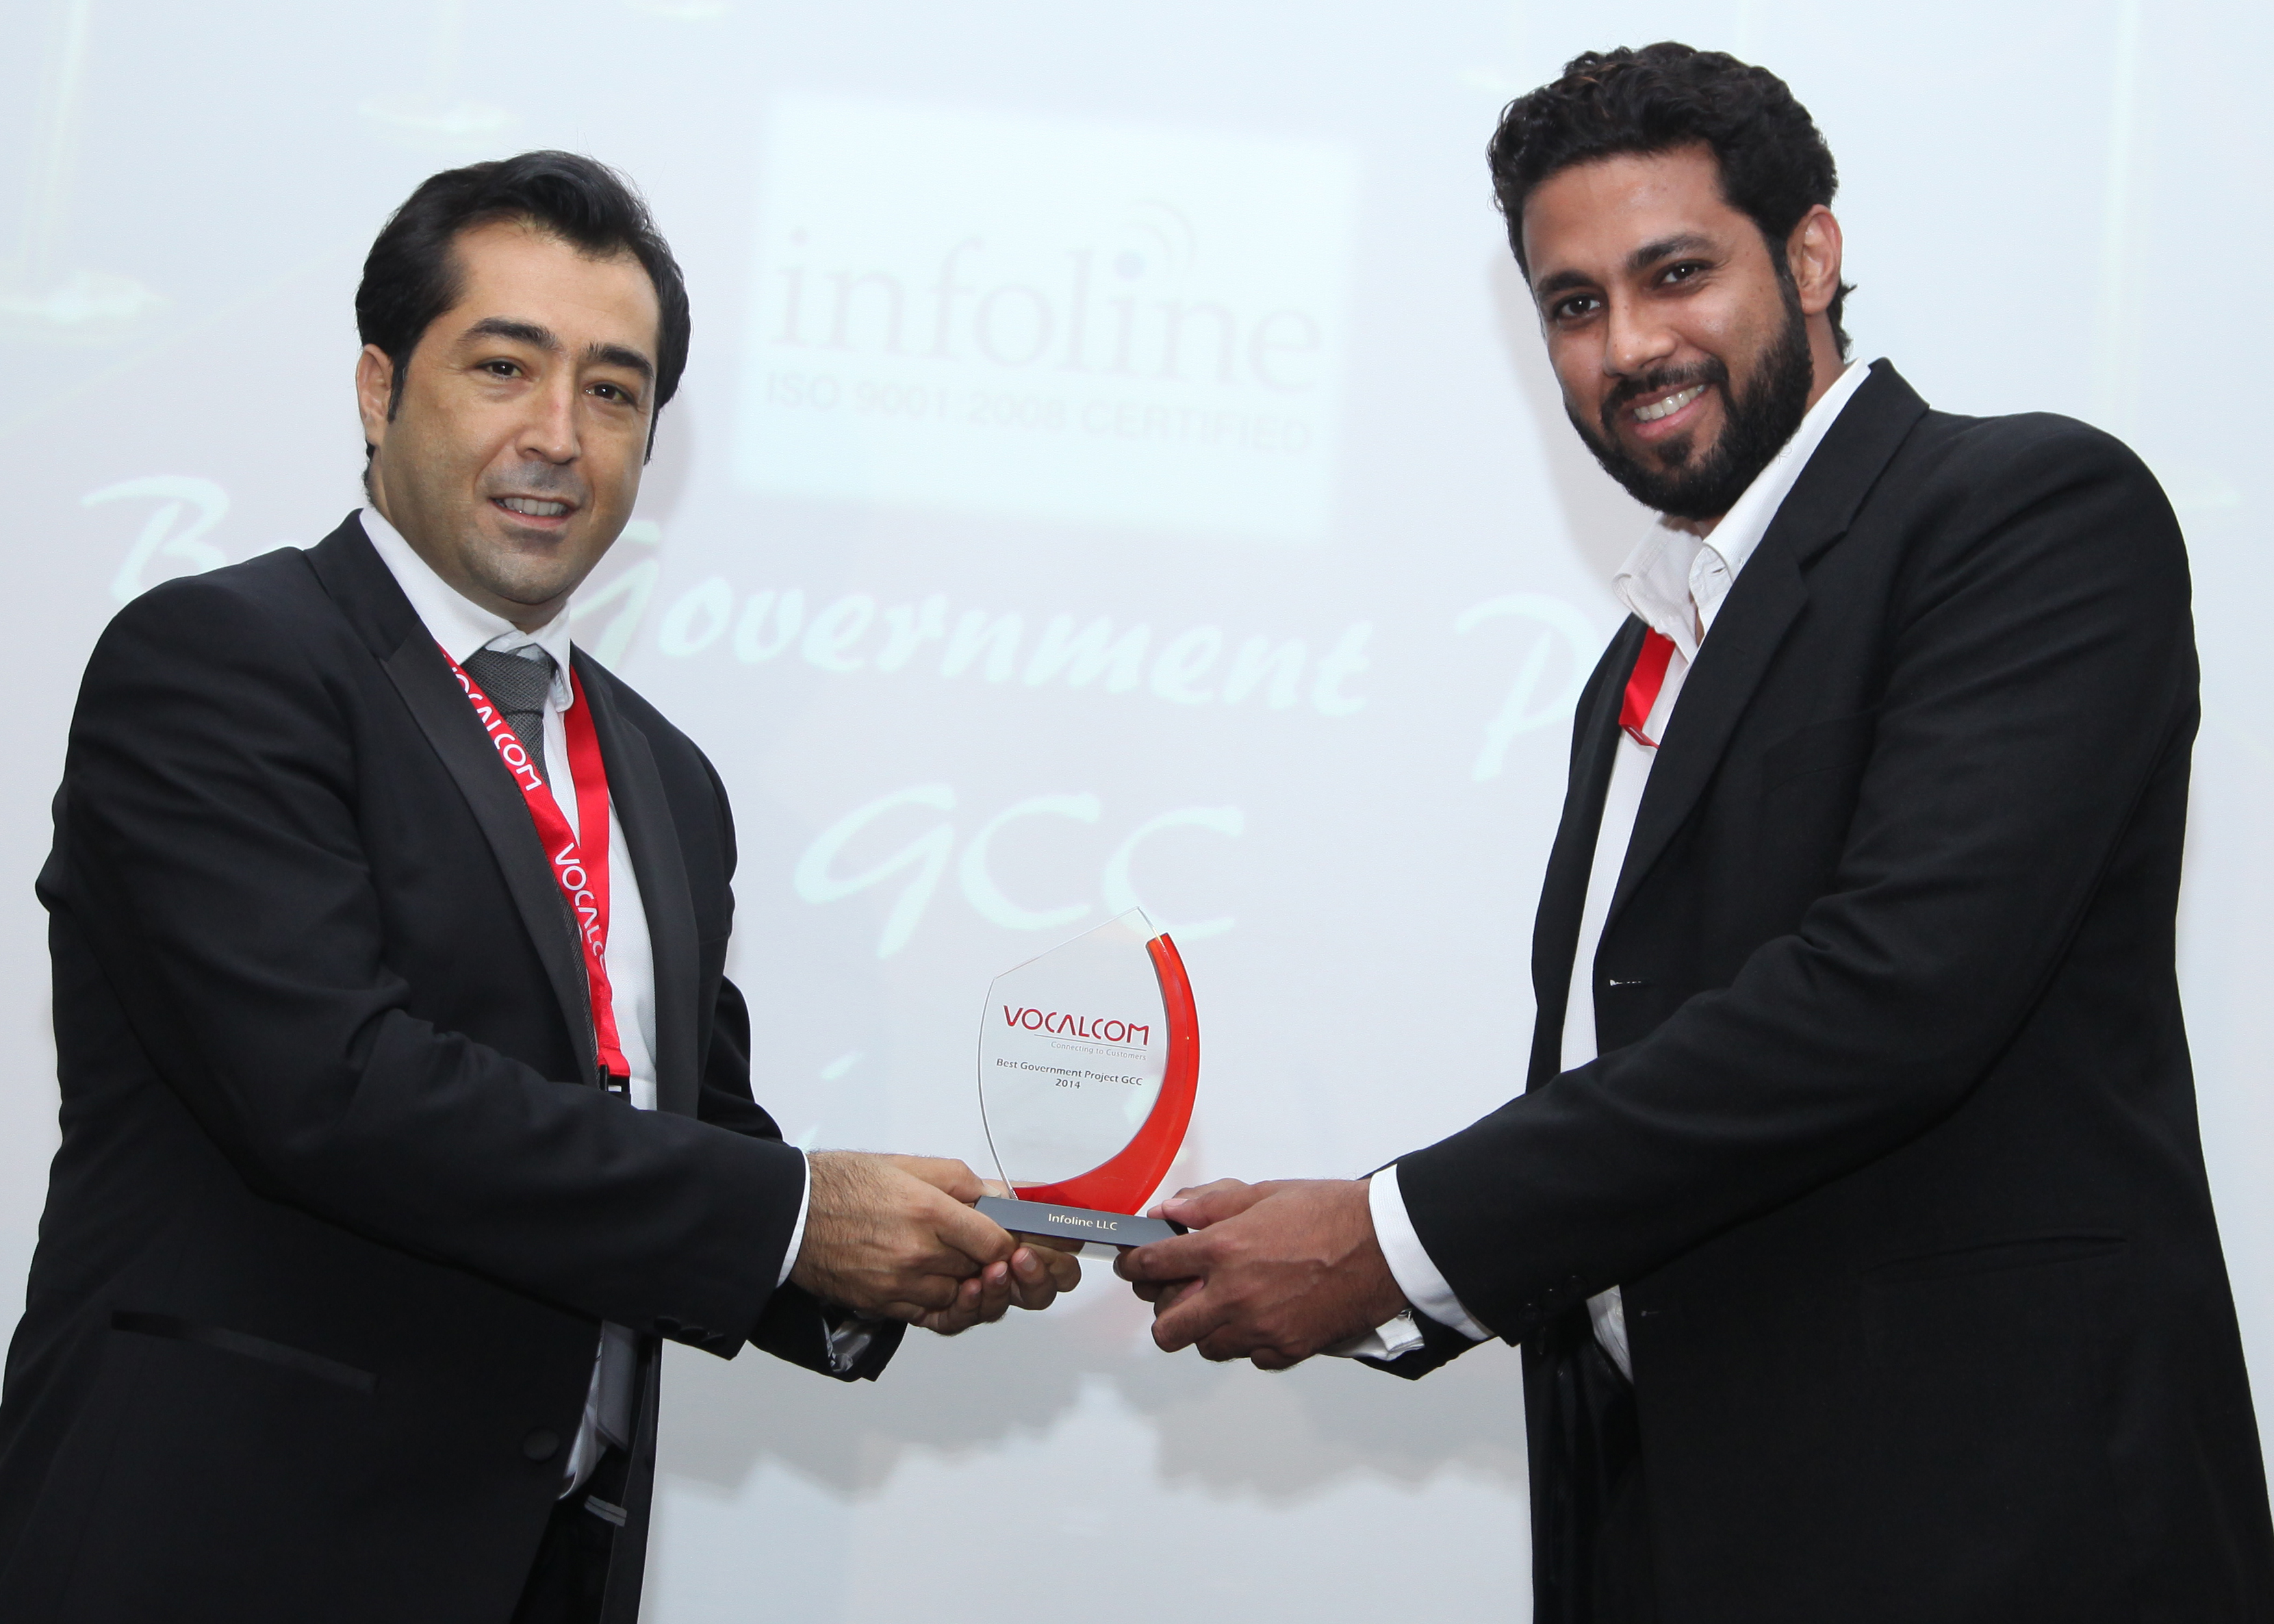 Infoline wins the best Government project award